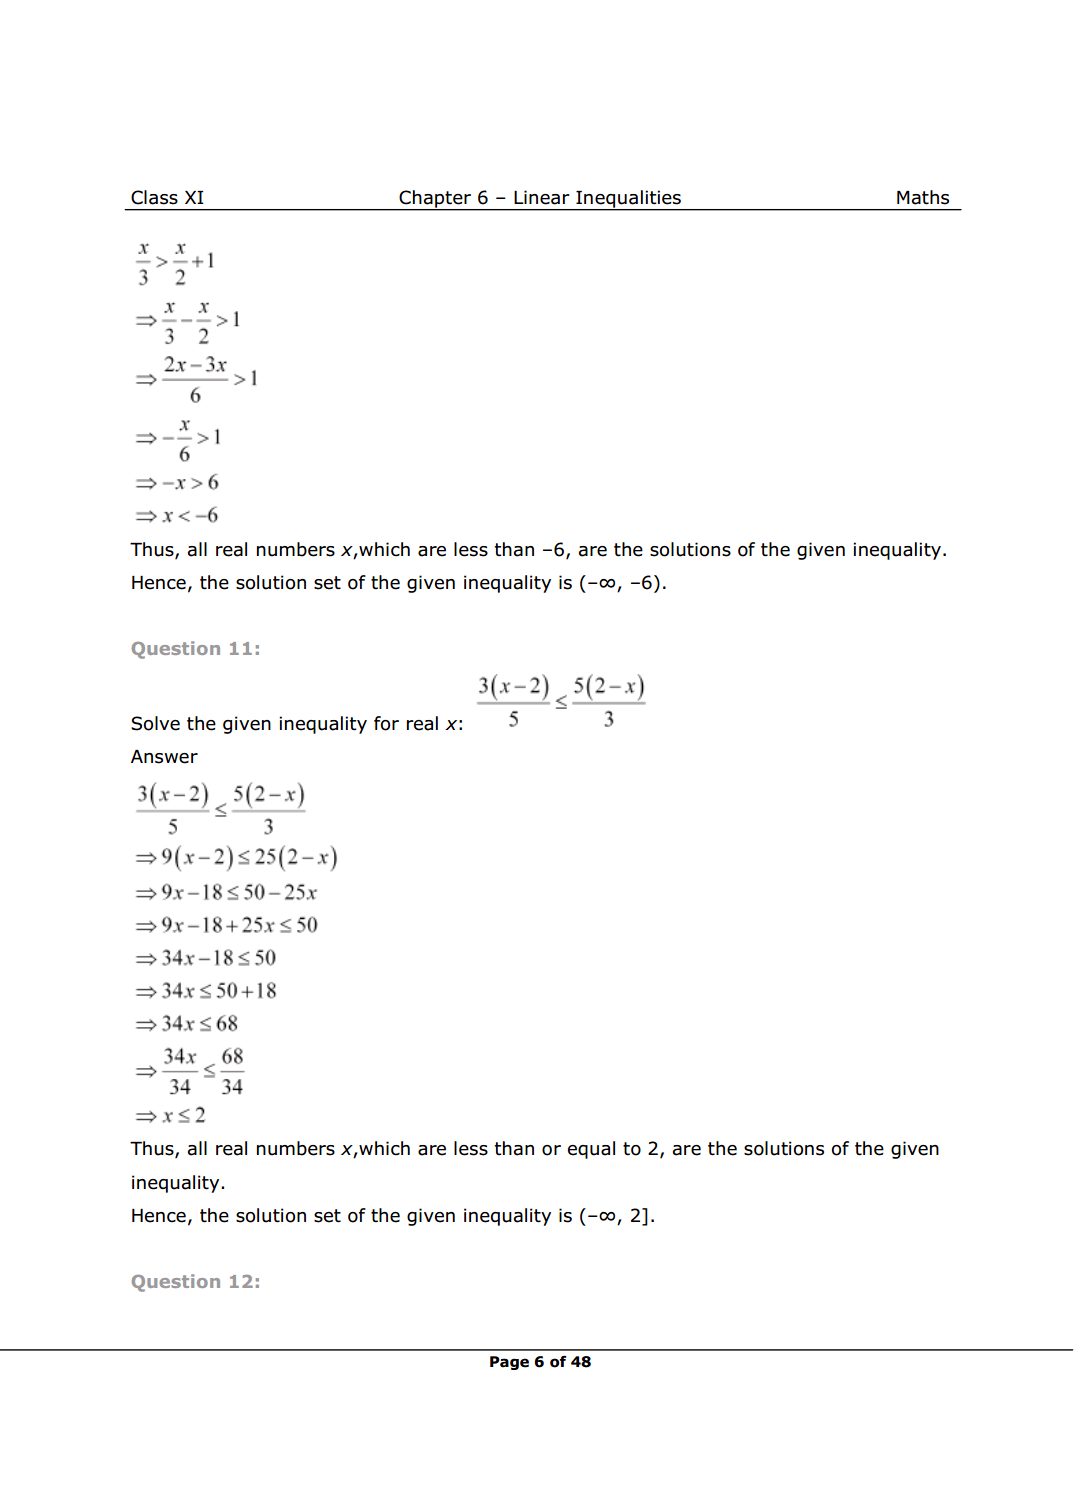 Class 11 Maths Chapter 6 Exercise 6.1 Solutions Image 6